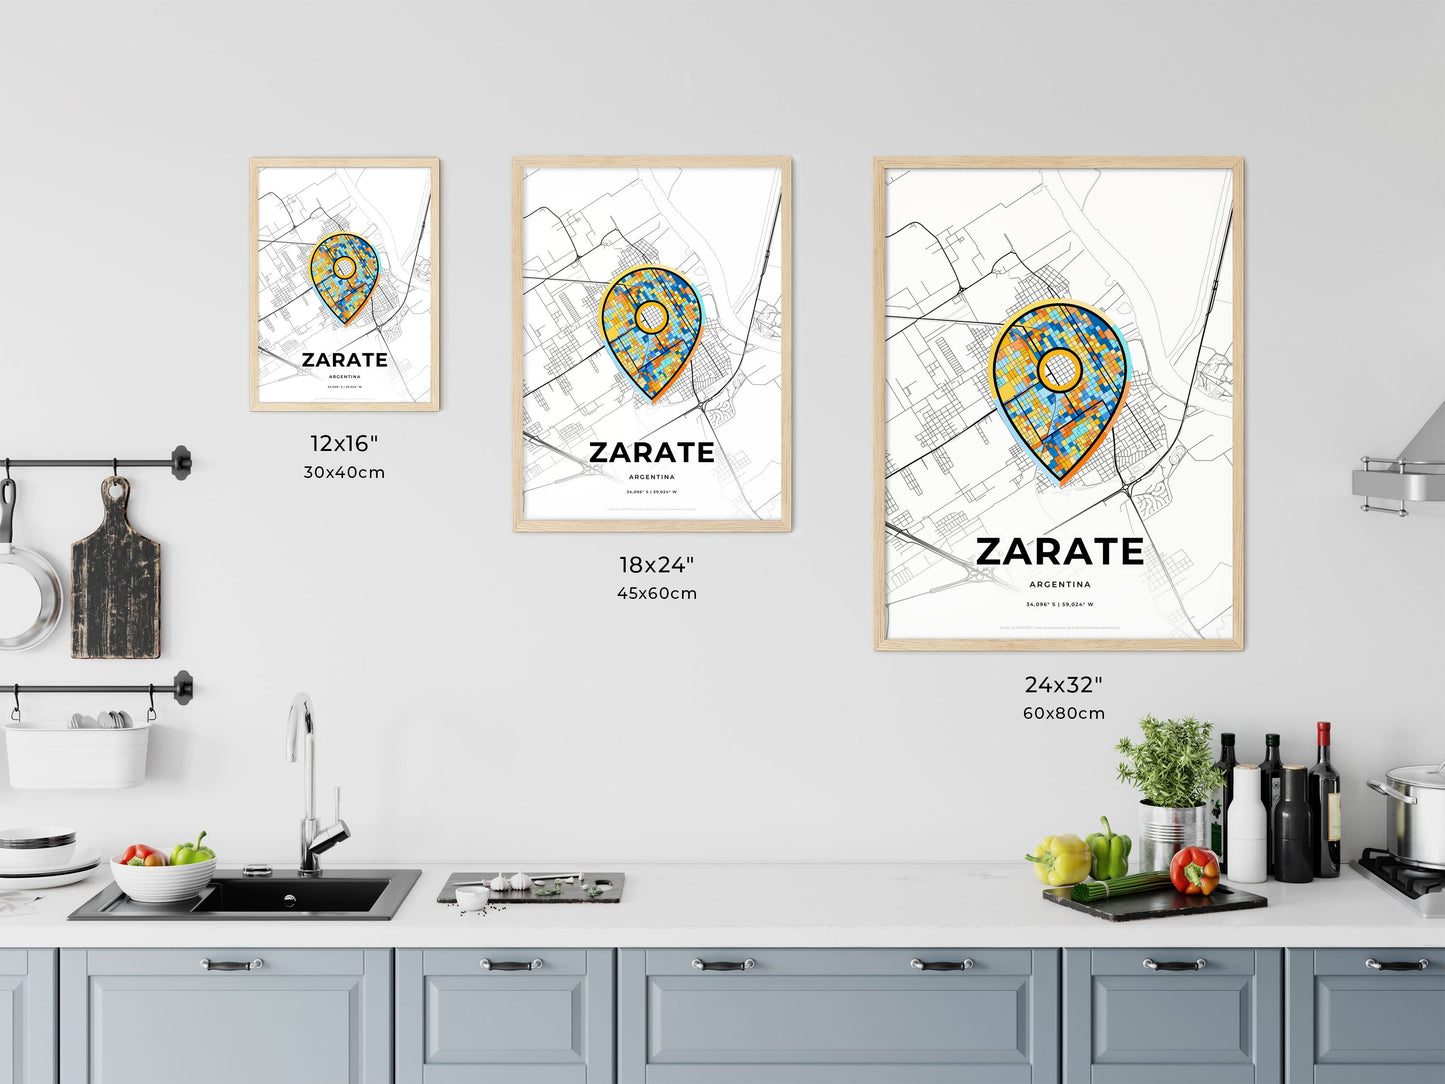 ZARATE ARGENTINA minimal art map with a colorful icon.